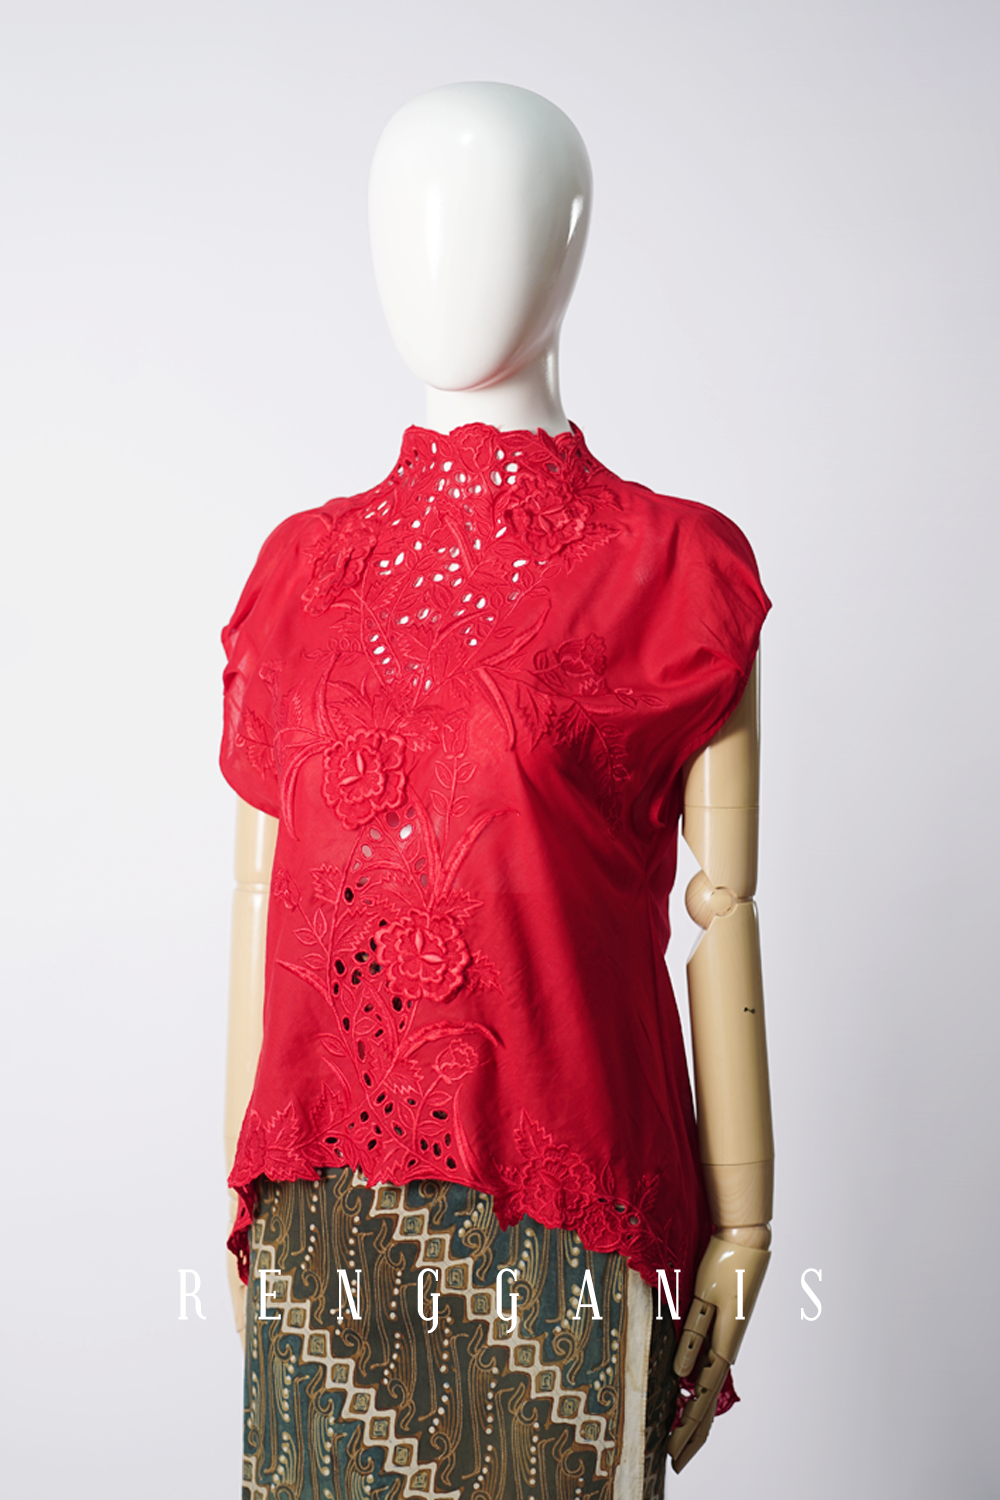 Gendis Top in Red